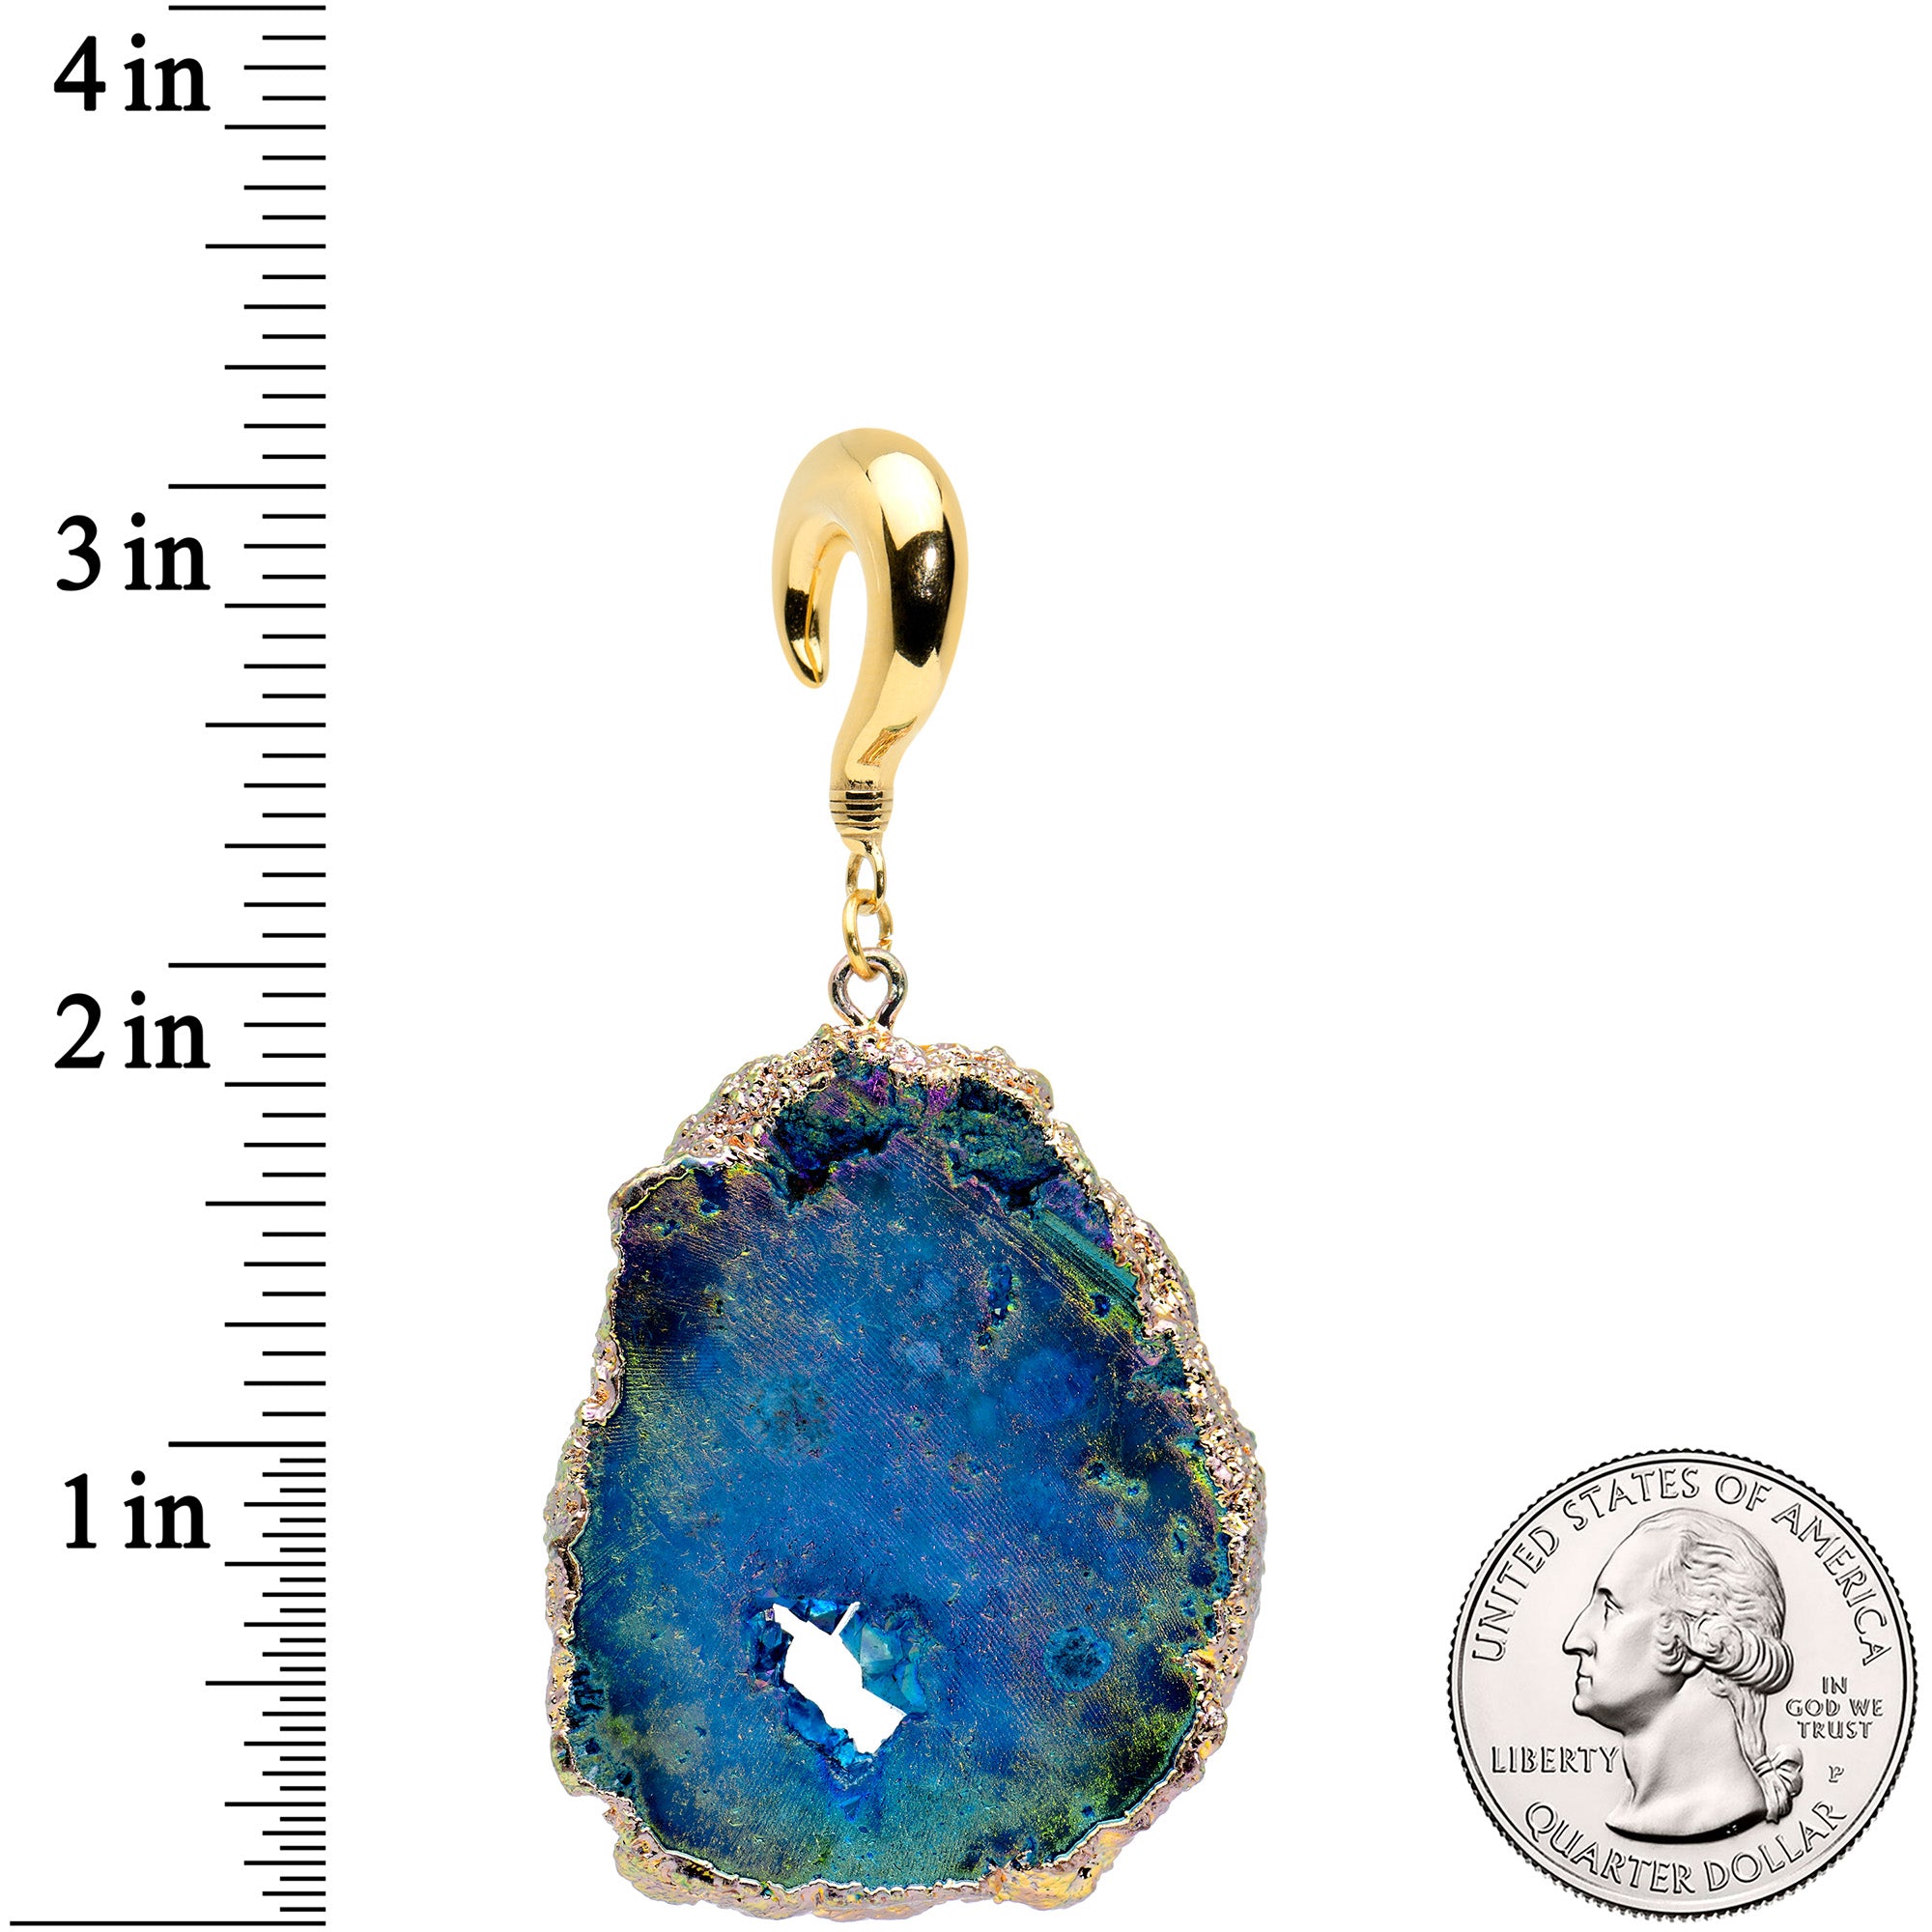 2 Gauge Gold Tone Blue Druzy Stone Curved Taper Ear Weights